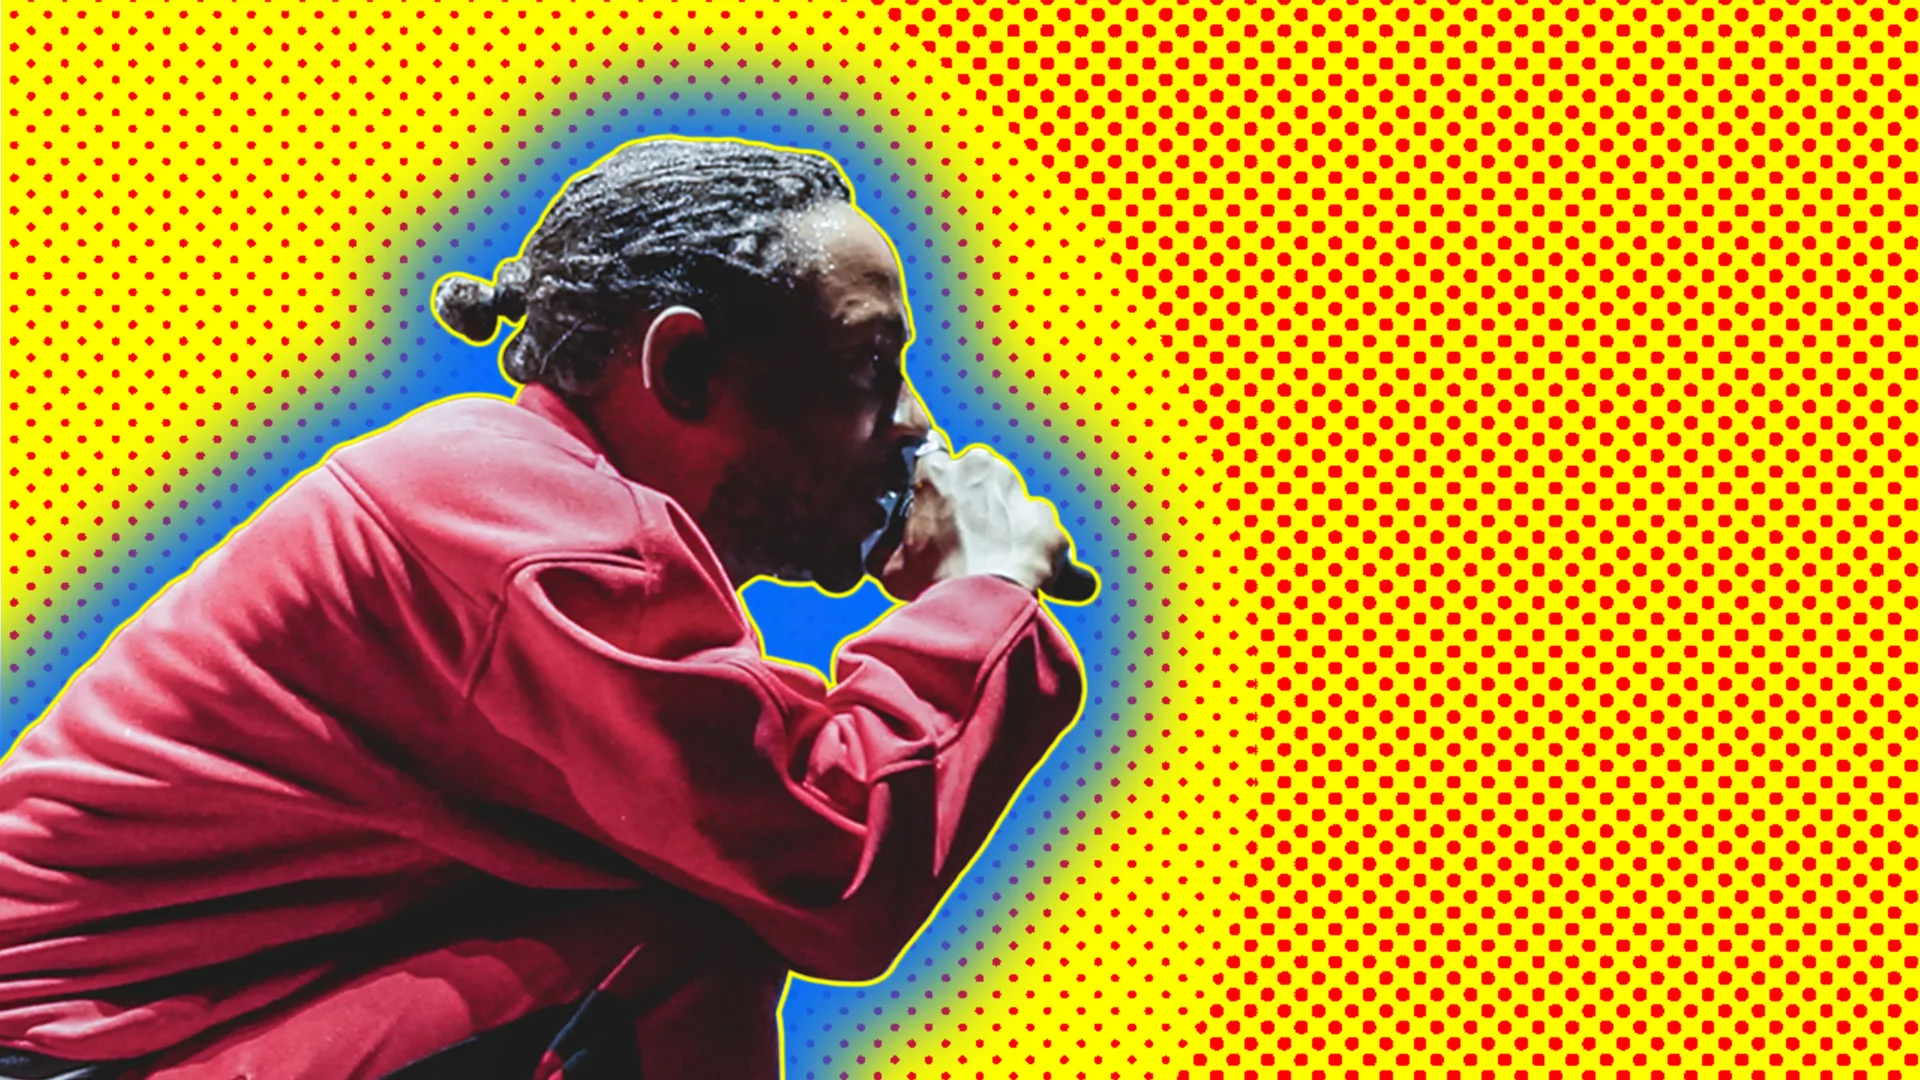 Side profile of Kendrick Lamar, wearing red tracksuit, singing with microphone, outlined by blue halo effect on yellow and red-dotted background.